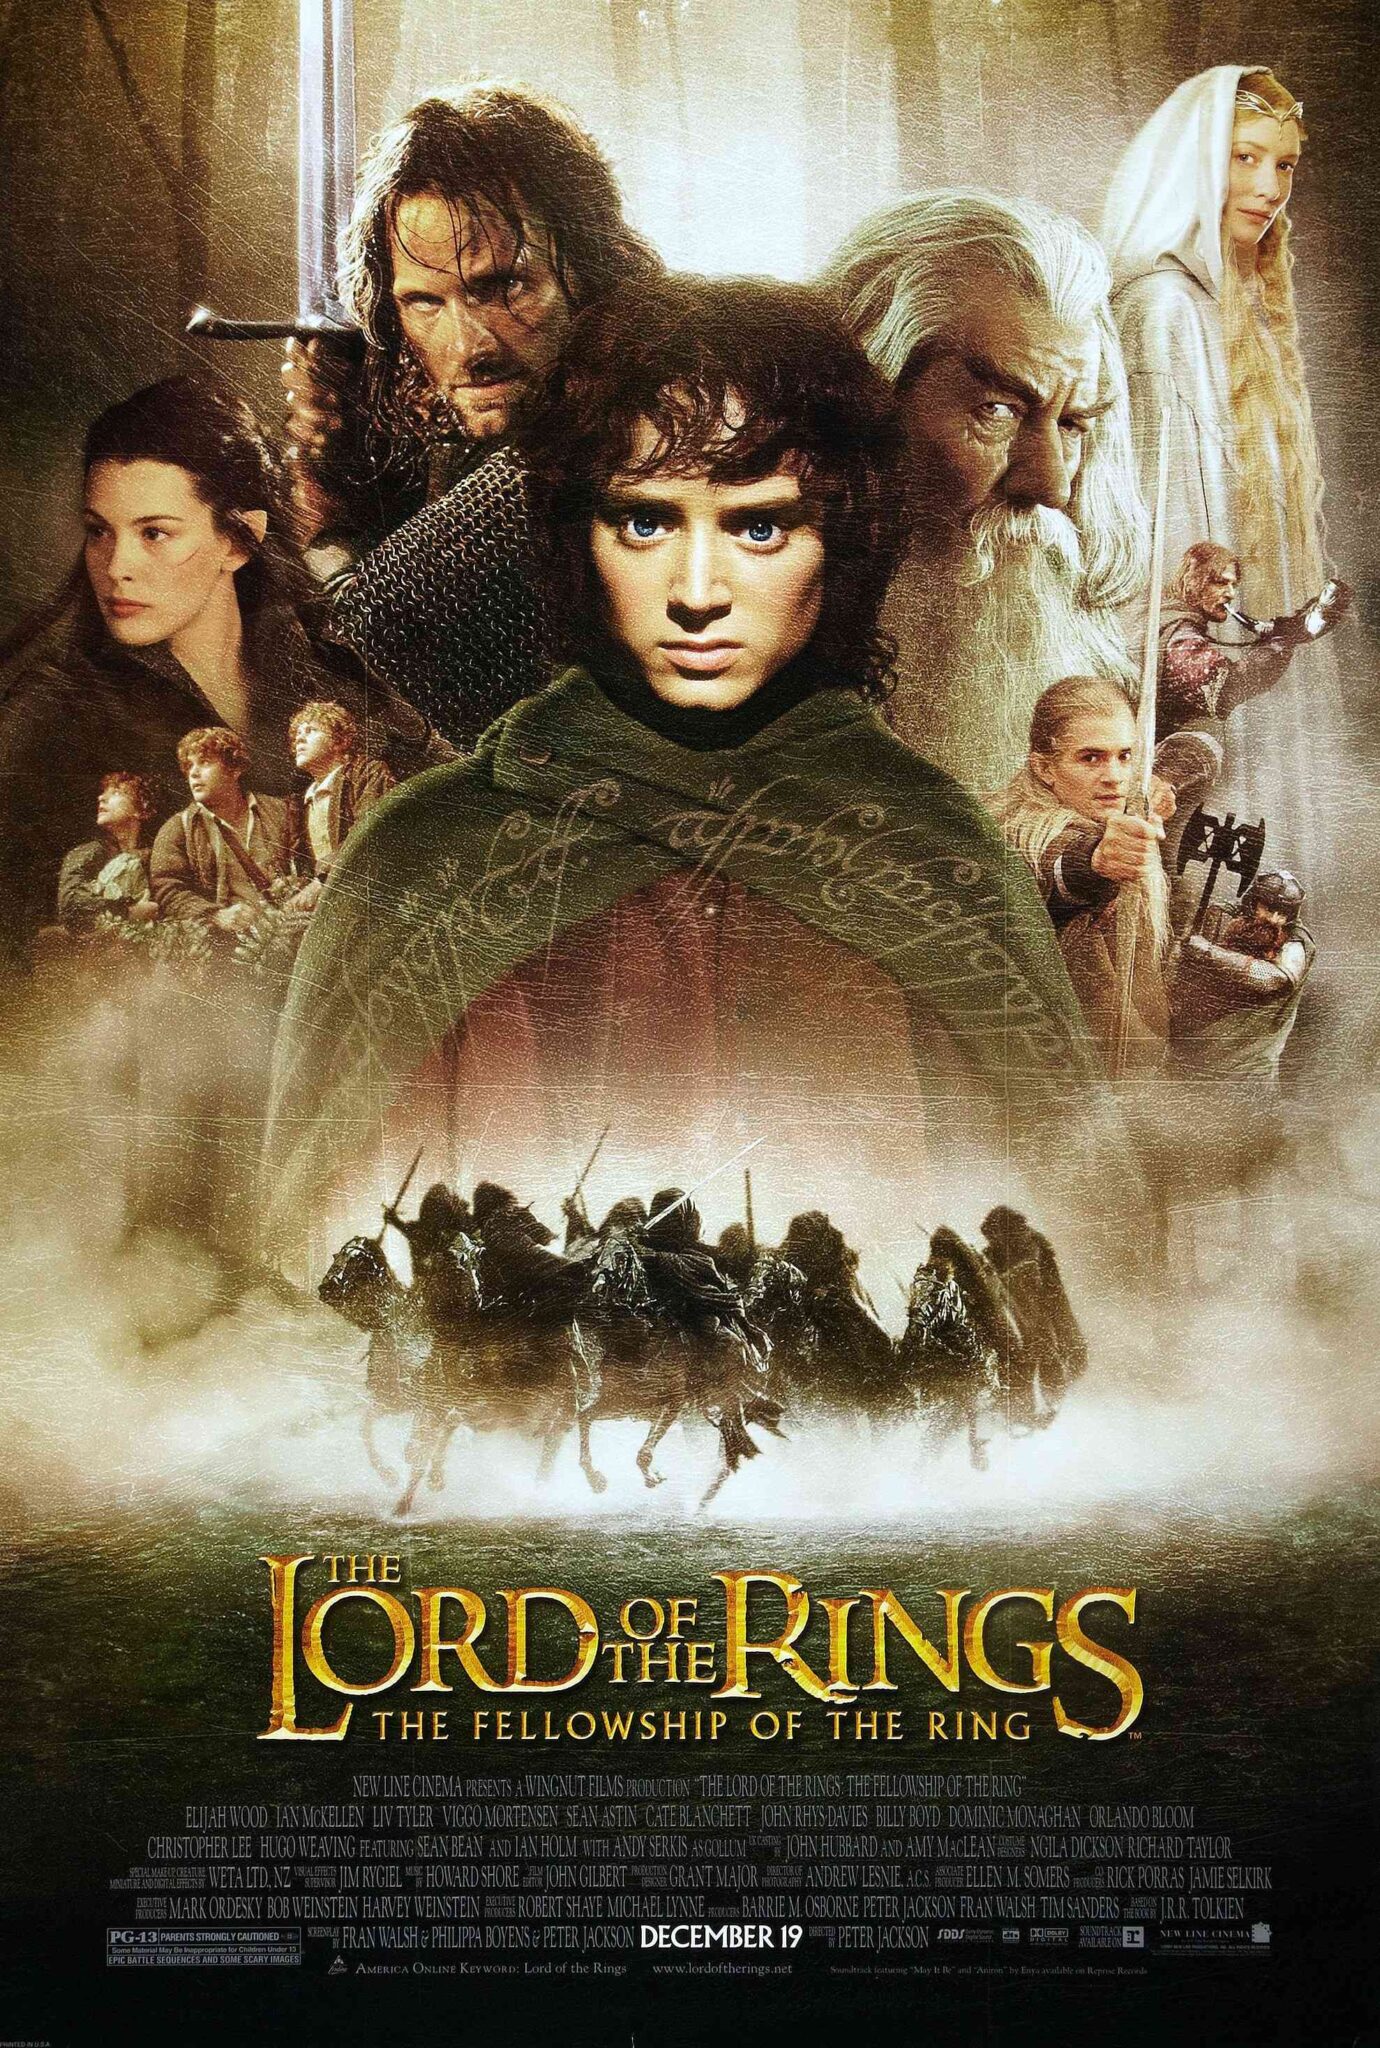 FULL MOVIE: The Lord of the Rings: The Fellowship of the Ring (2001)